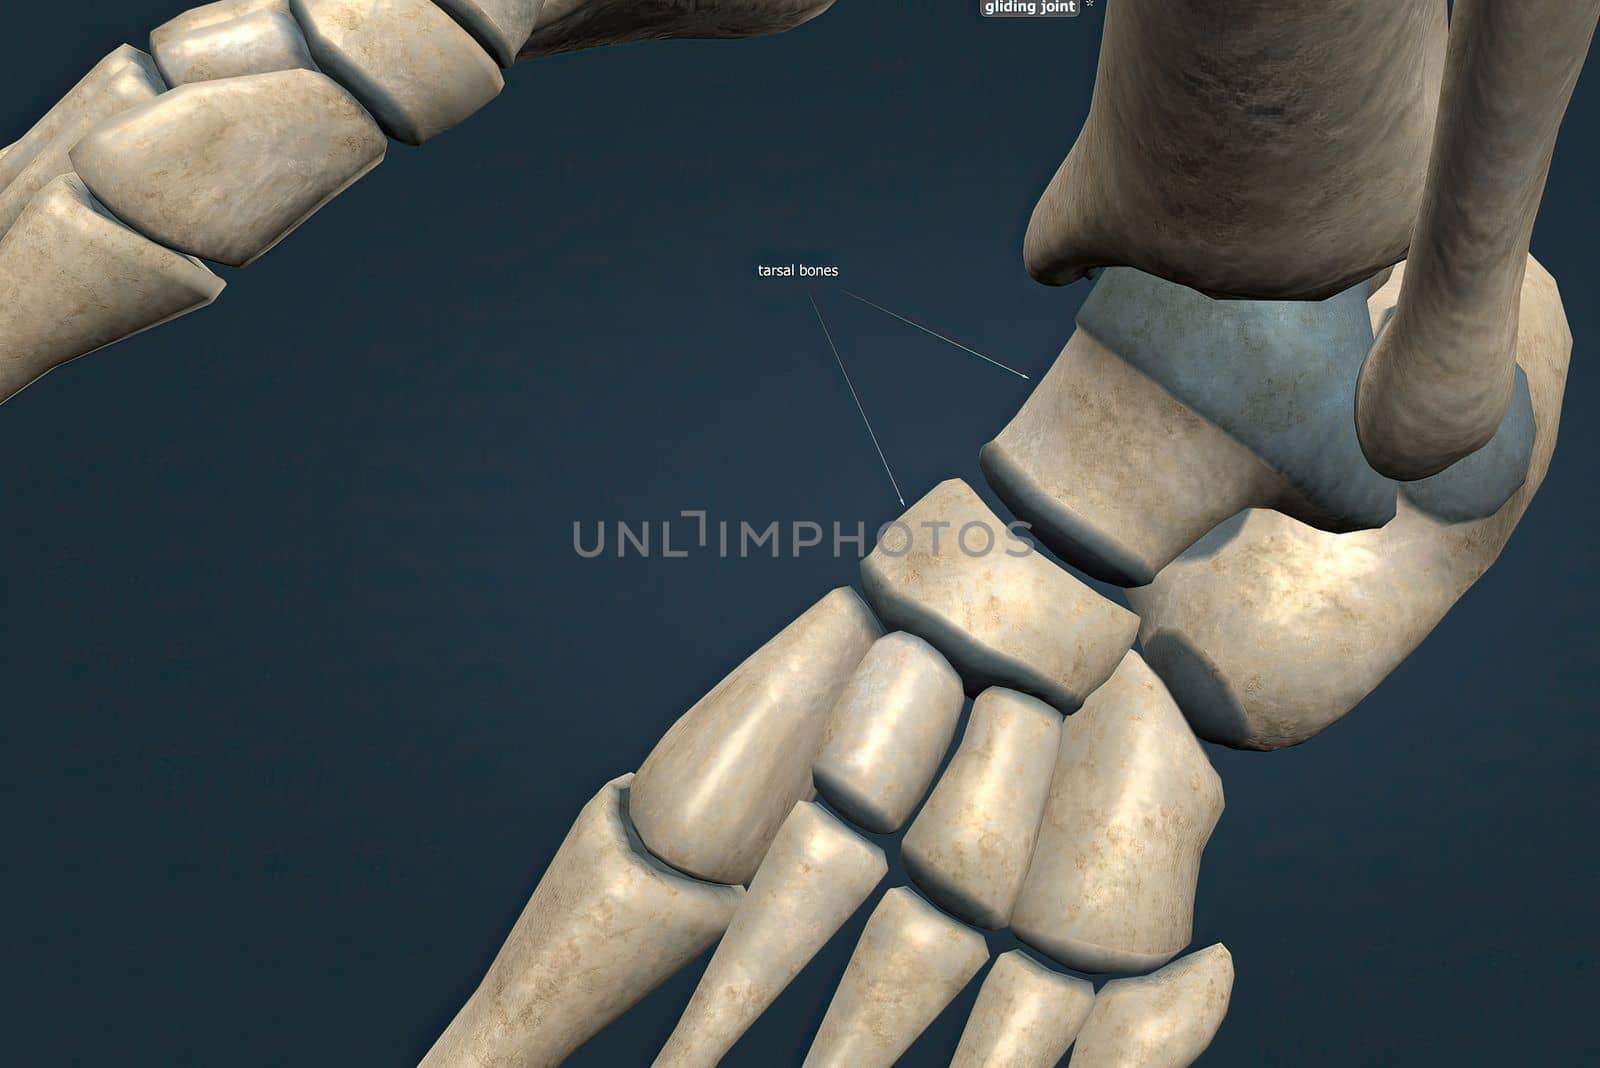 These comprise the hindfoot, forming the bony framework around the proximal ankle and heel.